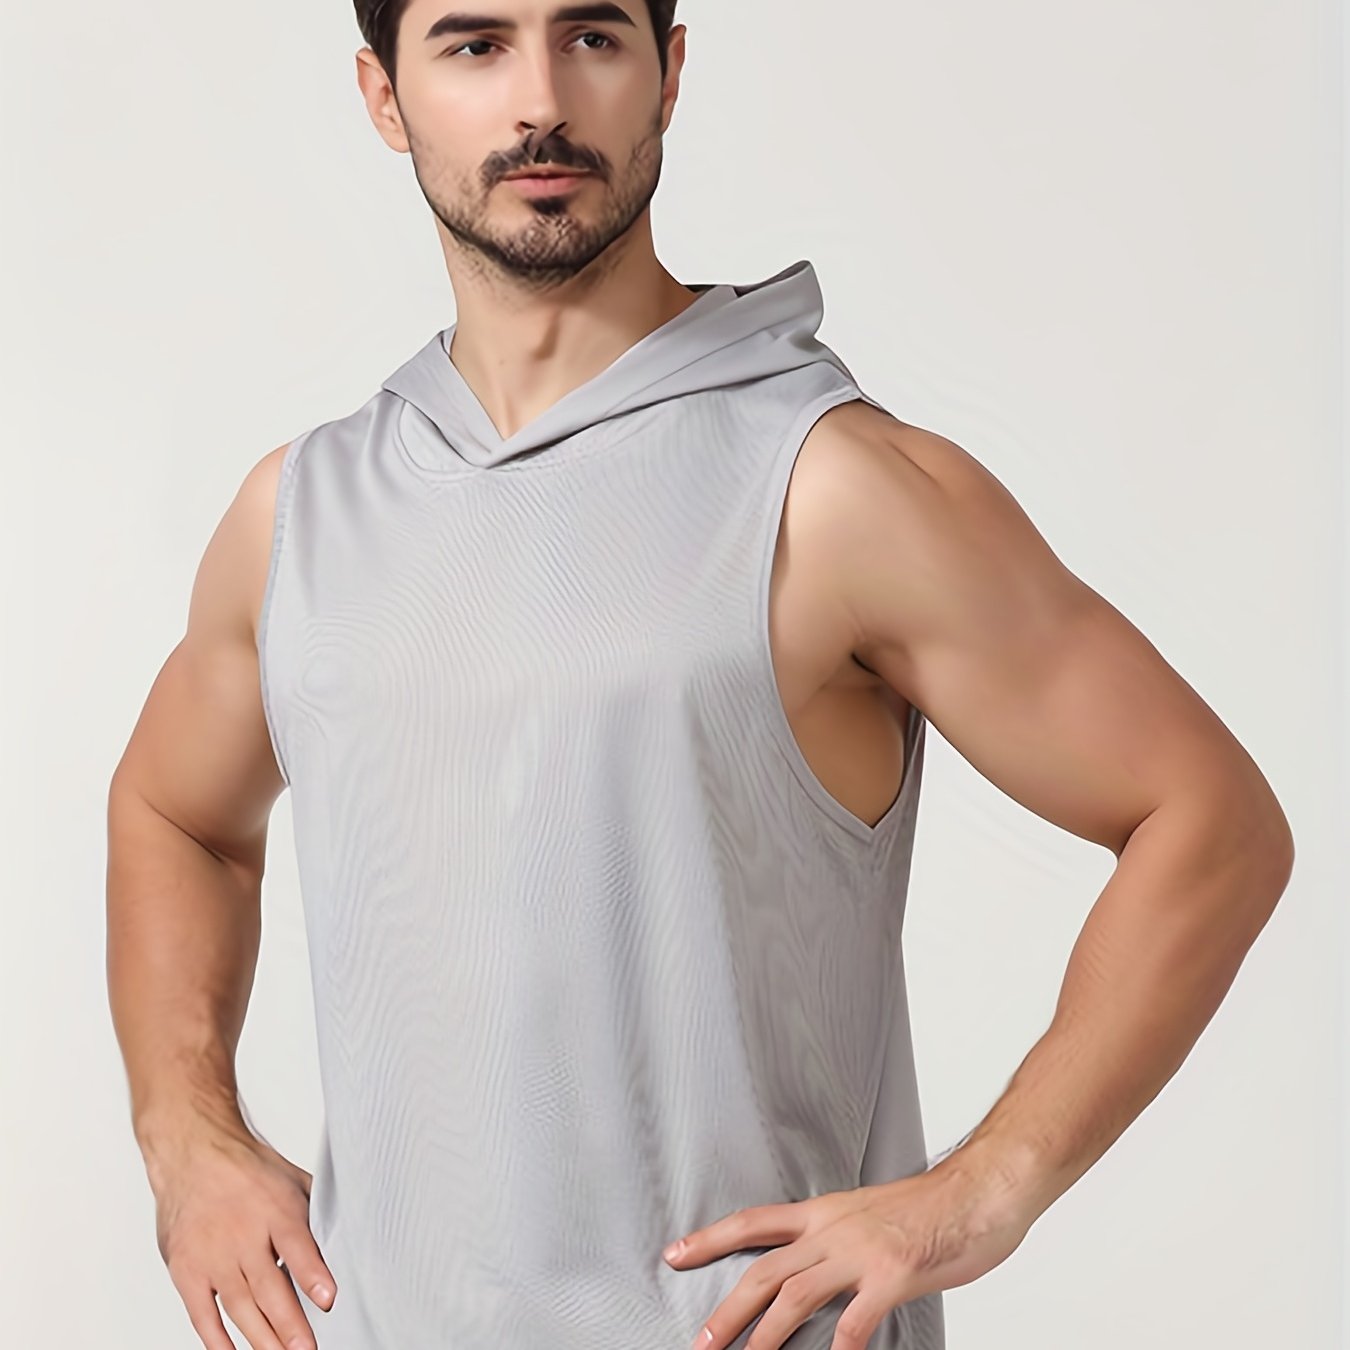 Classic Design Solid Color Men's Casual Round Neck Hooded Tank Top, Men's Slim Fit Tank Top For Summer Outdoor Gym Workout Bodybuilding Fitness, Gift For Men